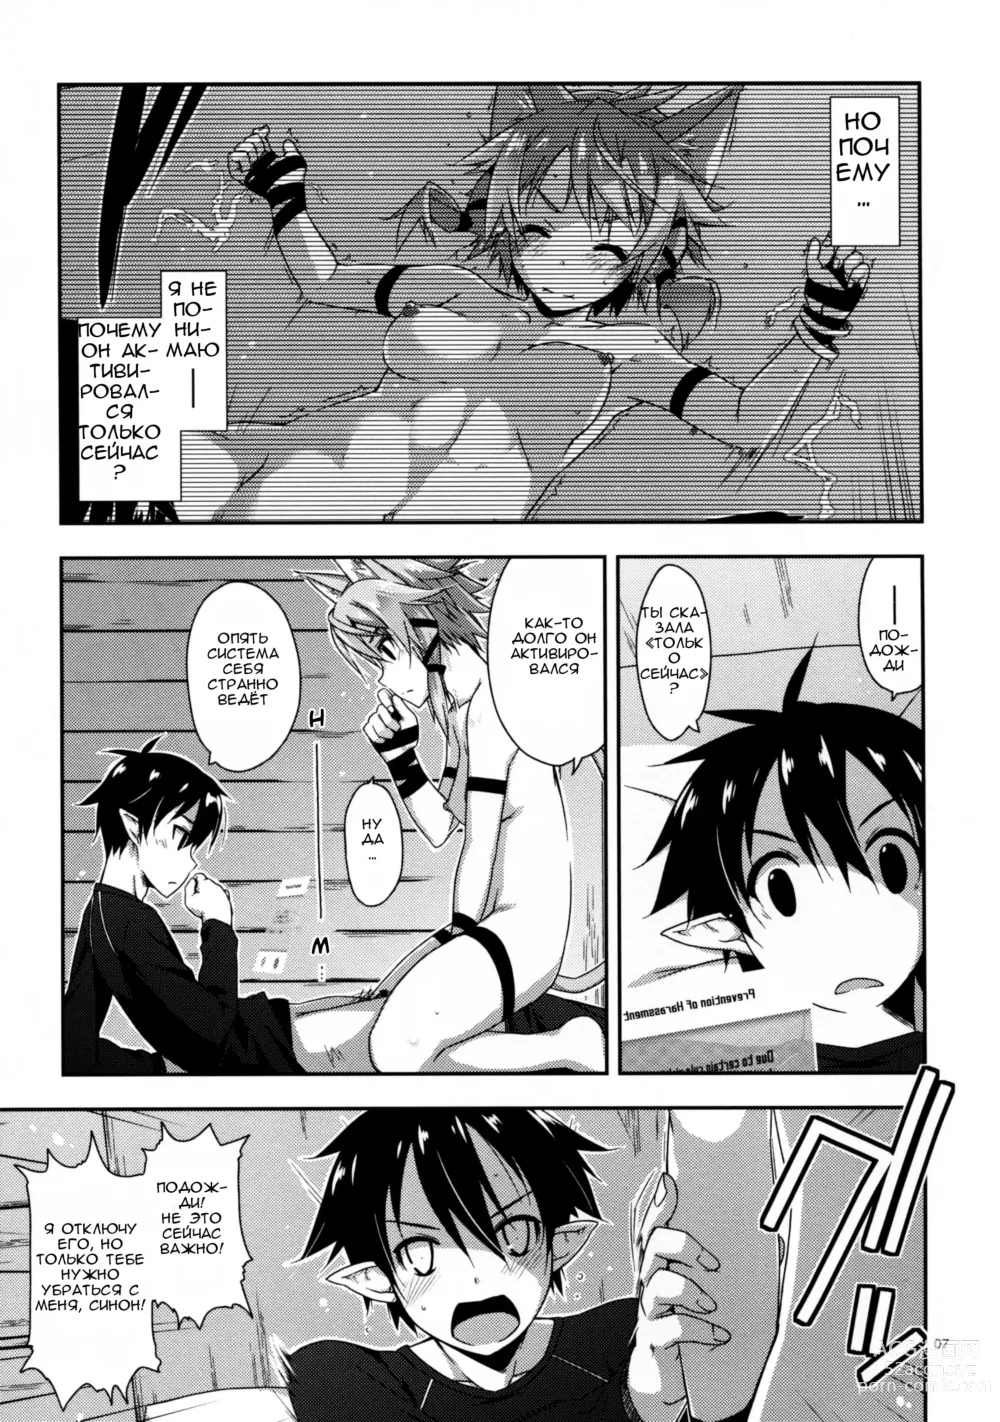 Page 7 of doujinshi Case closed.